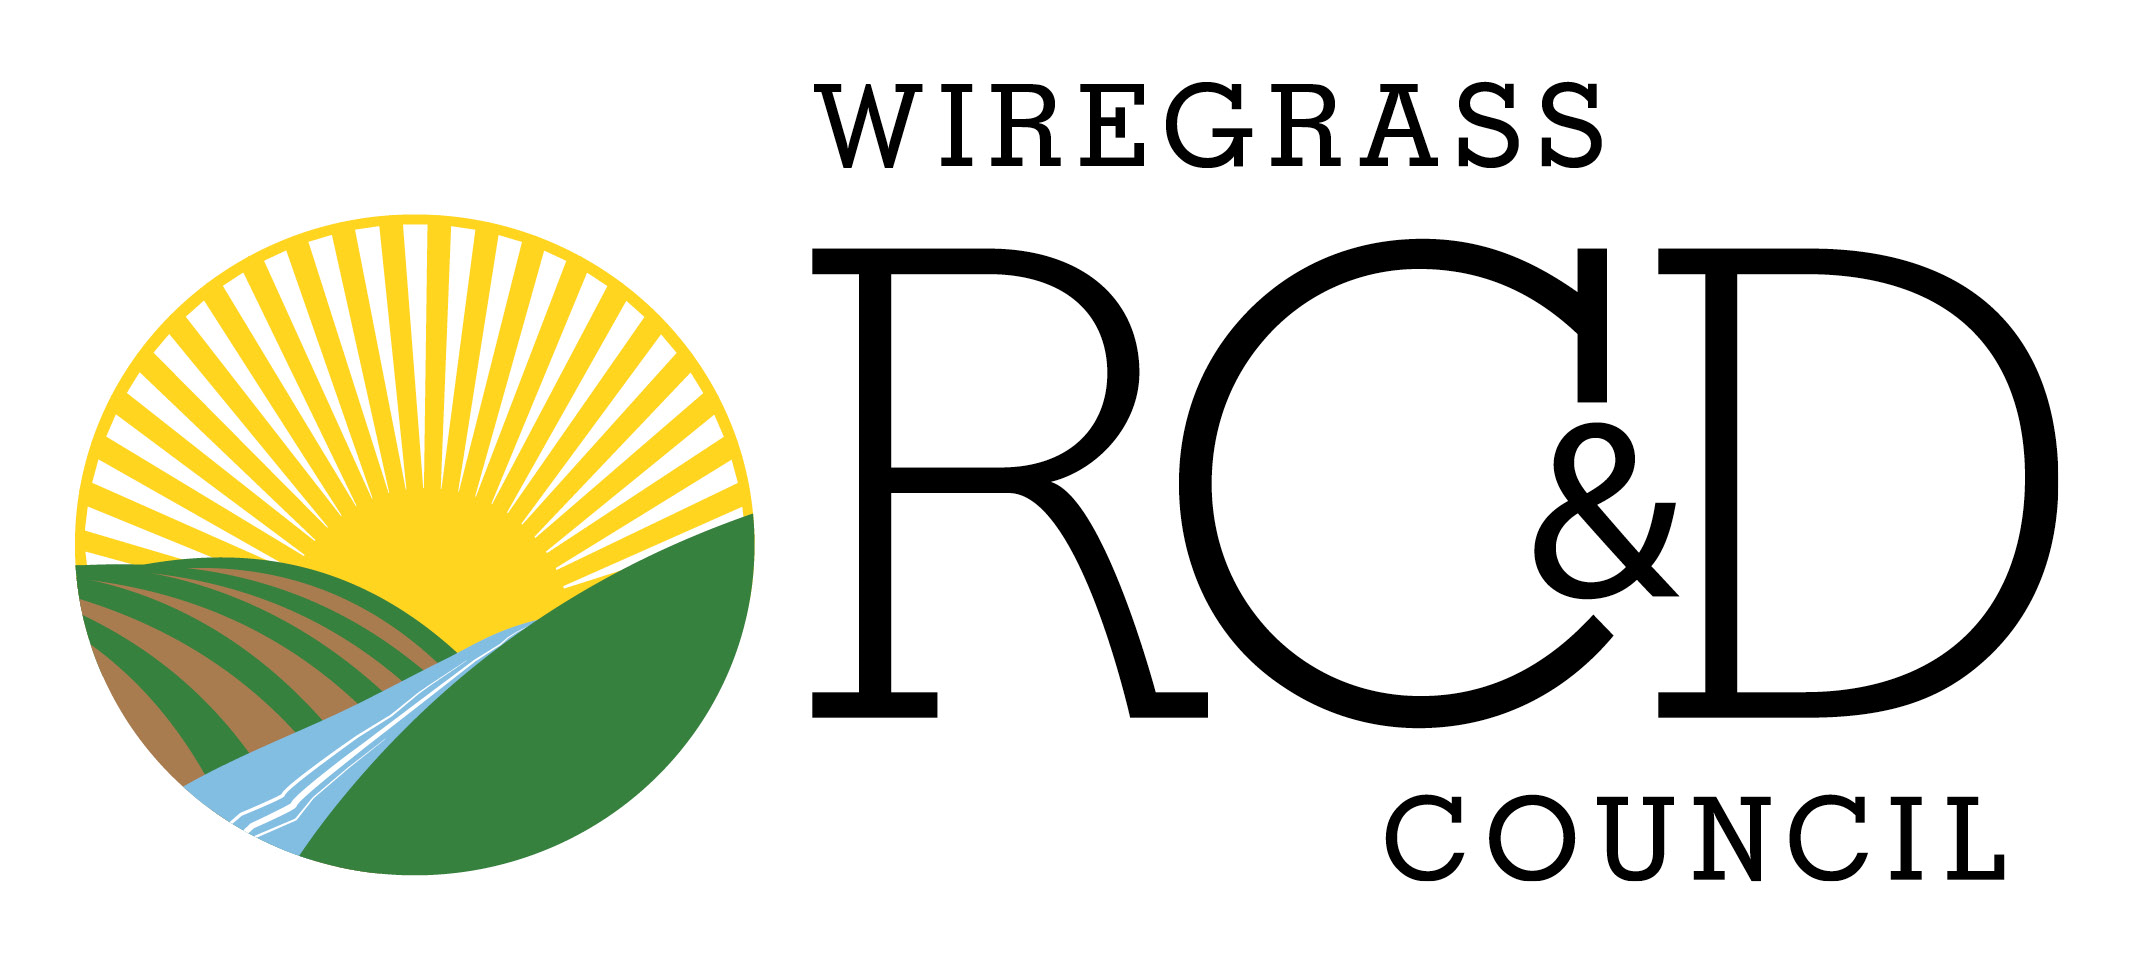 Wiregrass Logo PNG.png